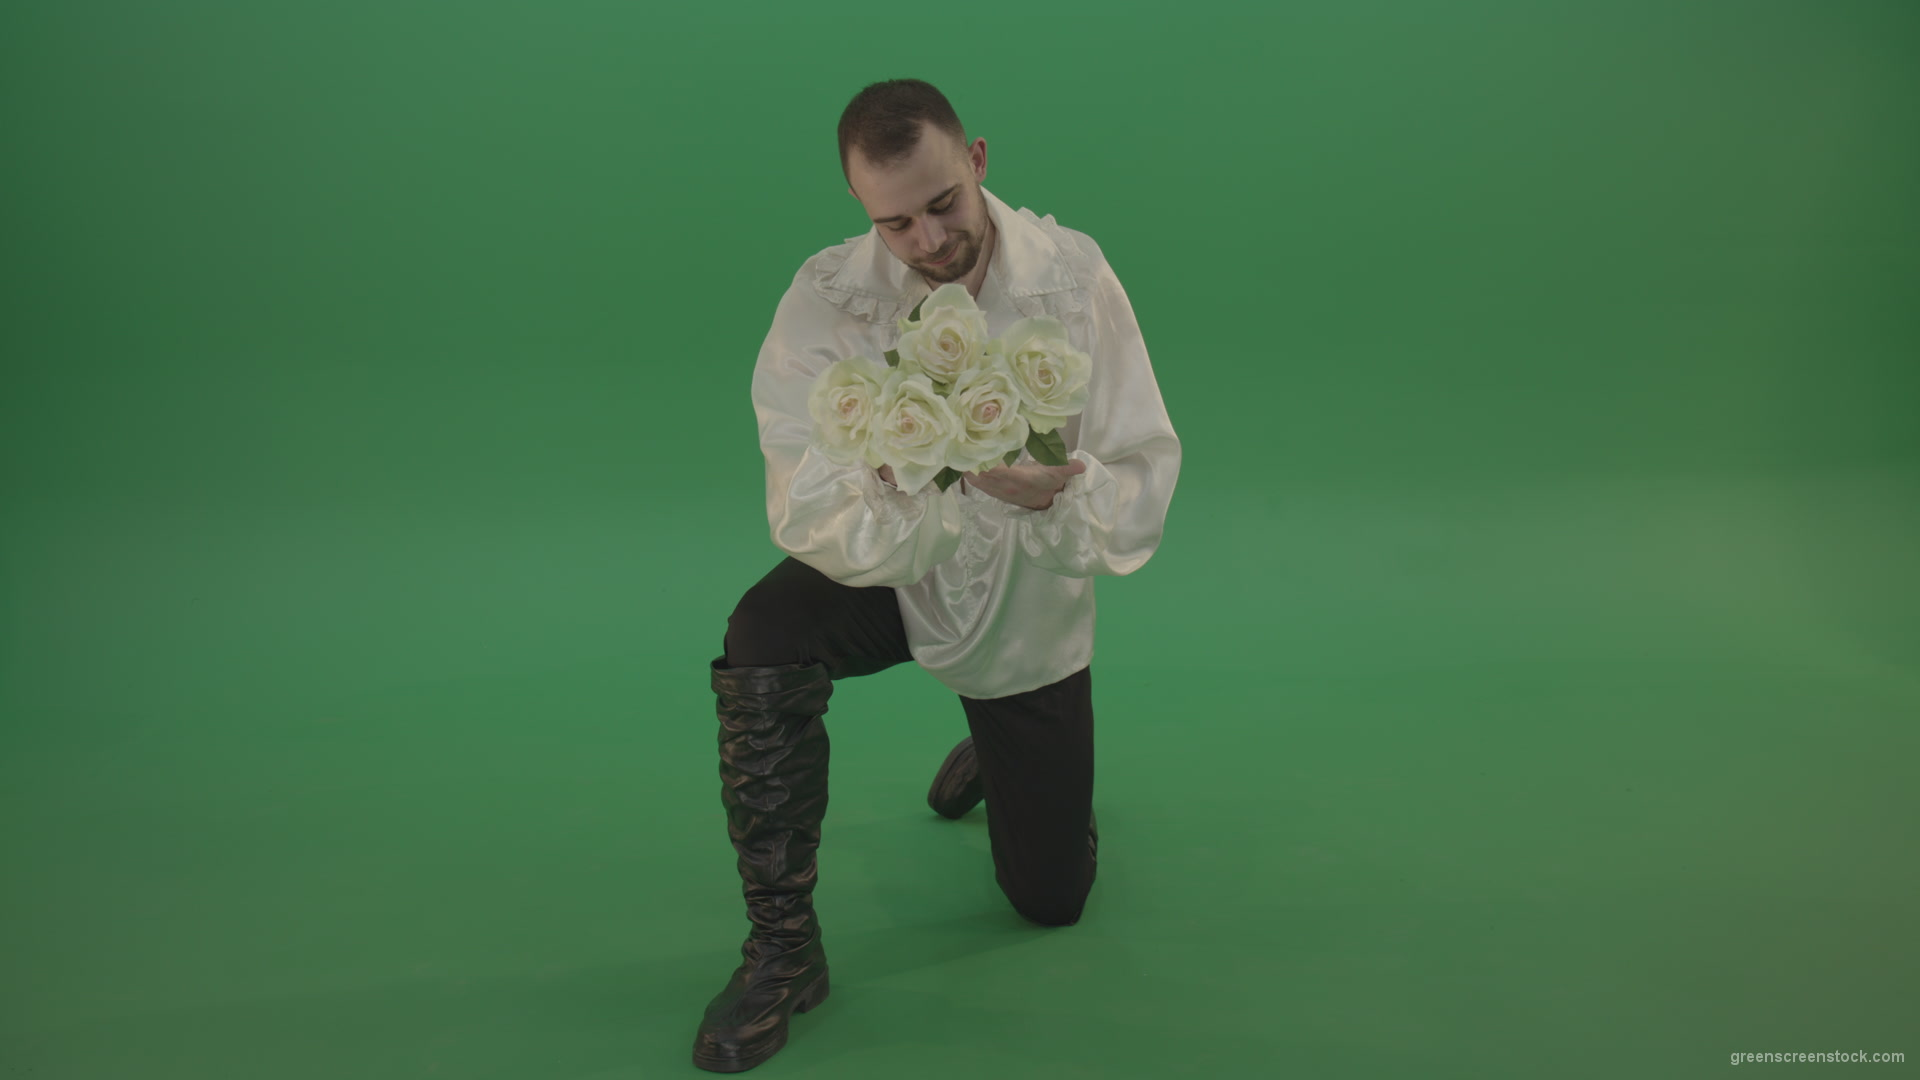 Medieval-man-gives-white-flowers-standing-on-one-knee-isolated-in-green-screen-studio_007 Green Screen Stock